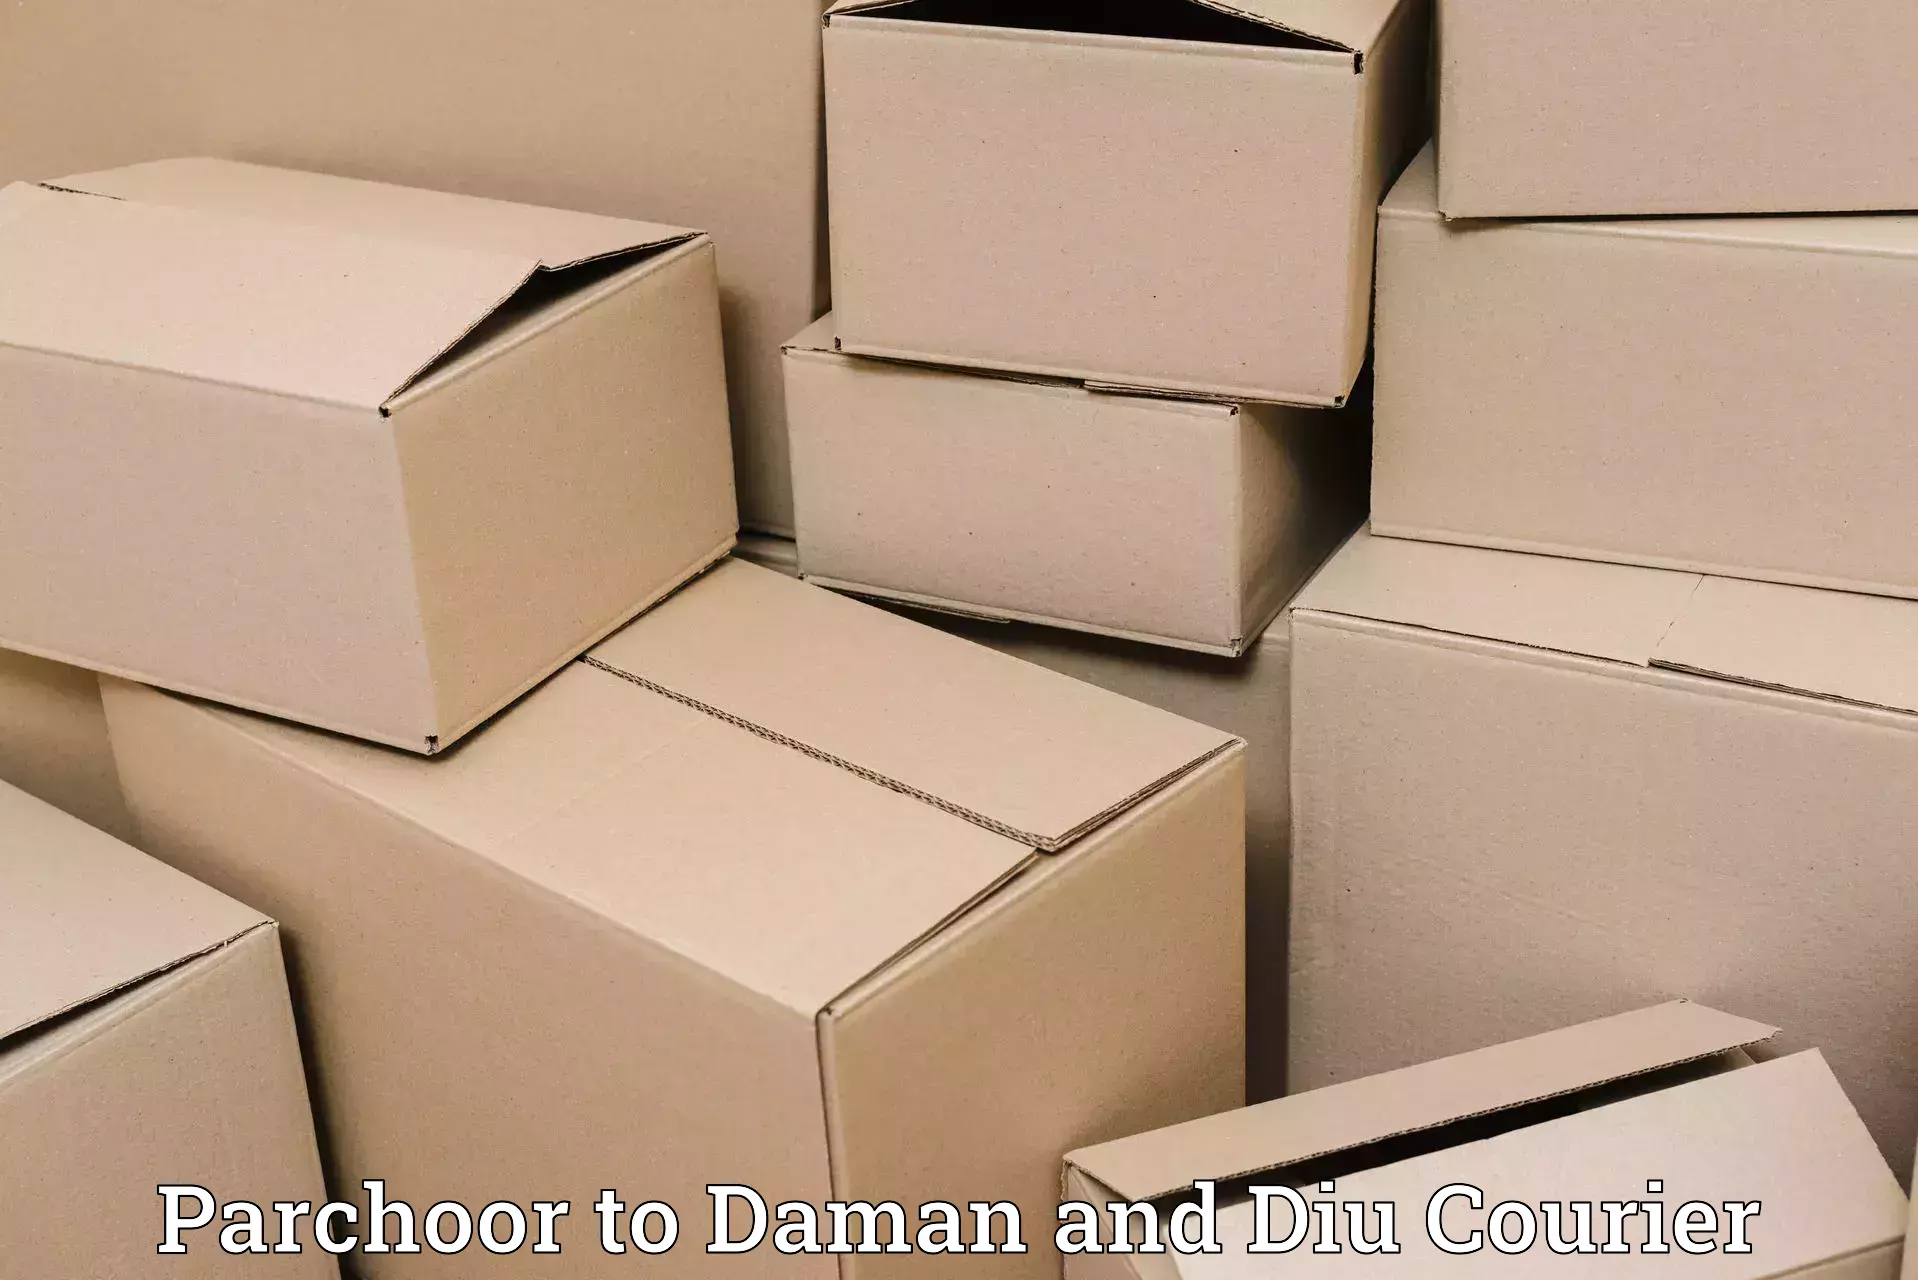 Cost-effective shipping solutions Parchoor to Daman and Diu